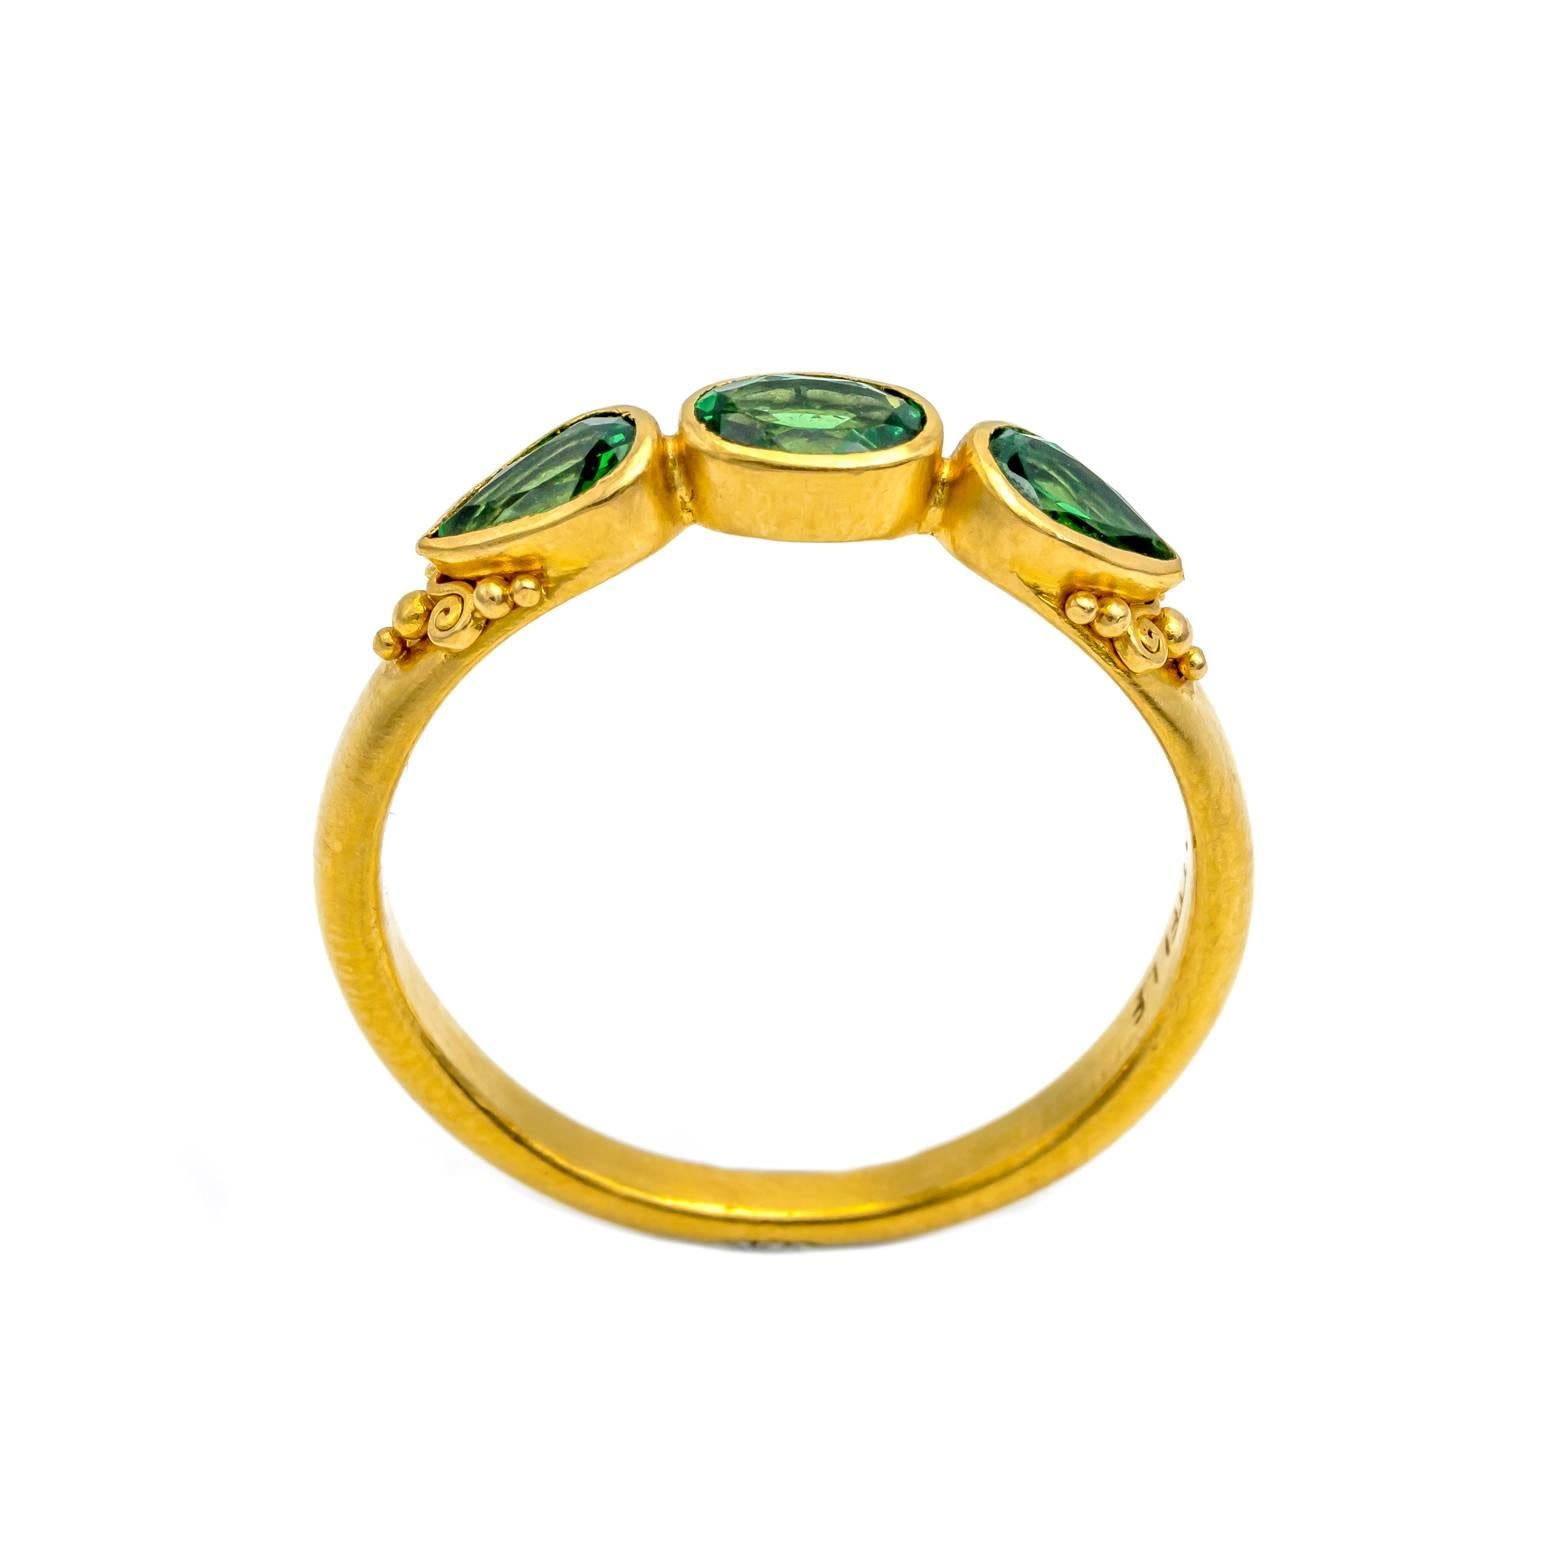 Three glowing green tsavorite garnets are set next to each other in 18K yellow gold. Bezel set with two pear shapes pointing outward and a central oval, this ring mesmerizes! The high carat satin finish is regal with tiny granulation and mini